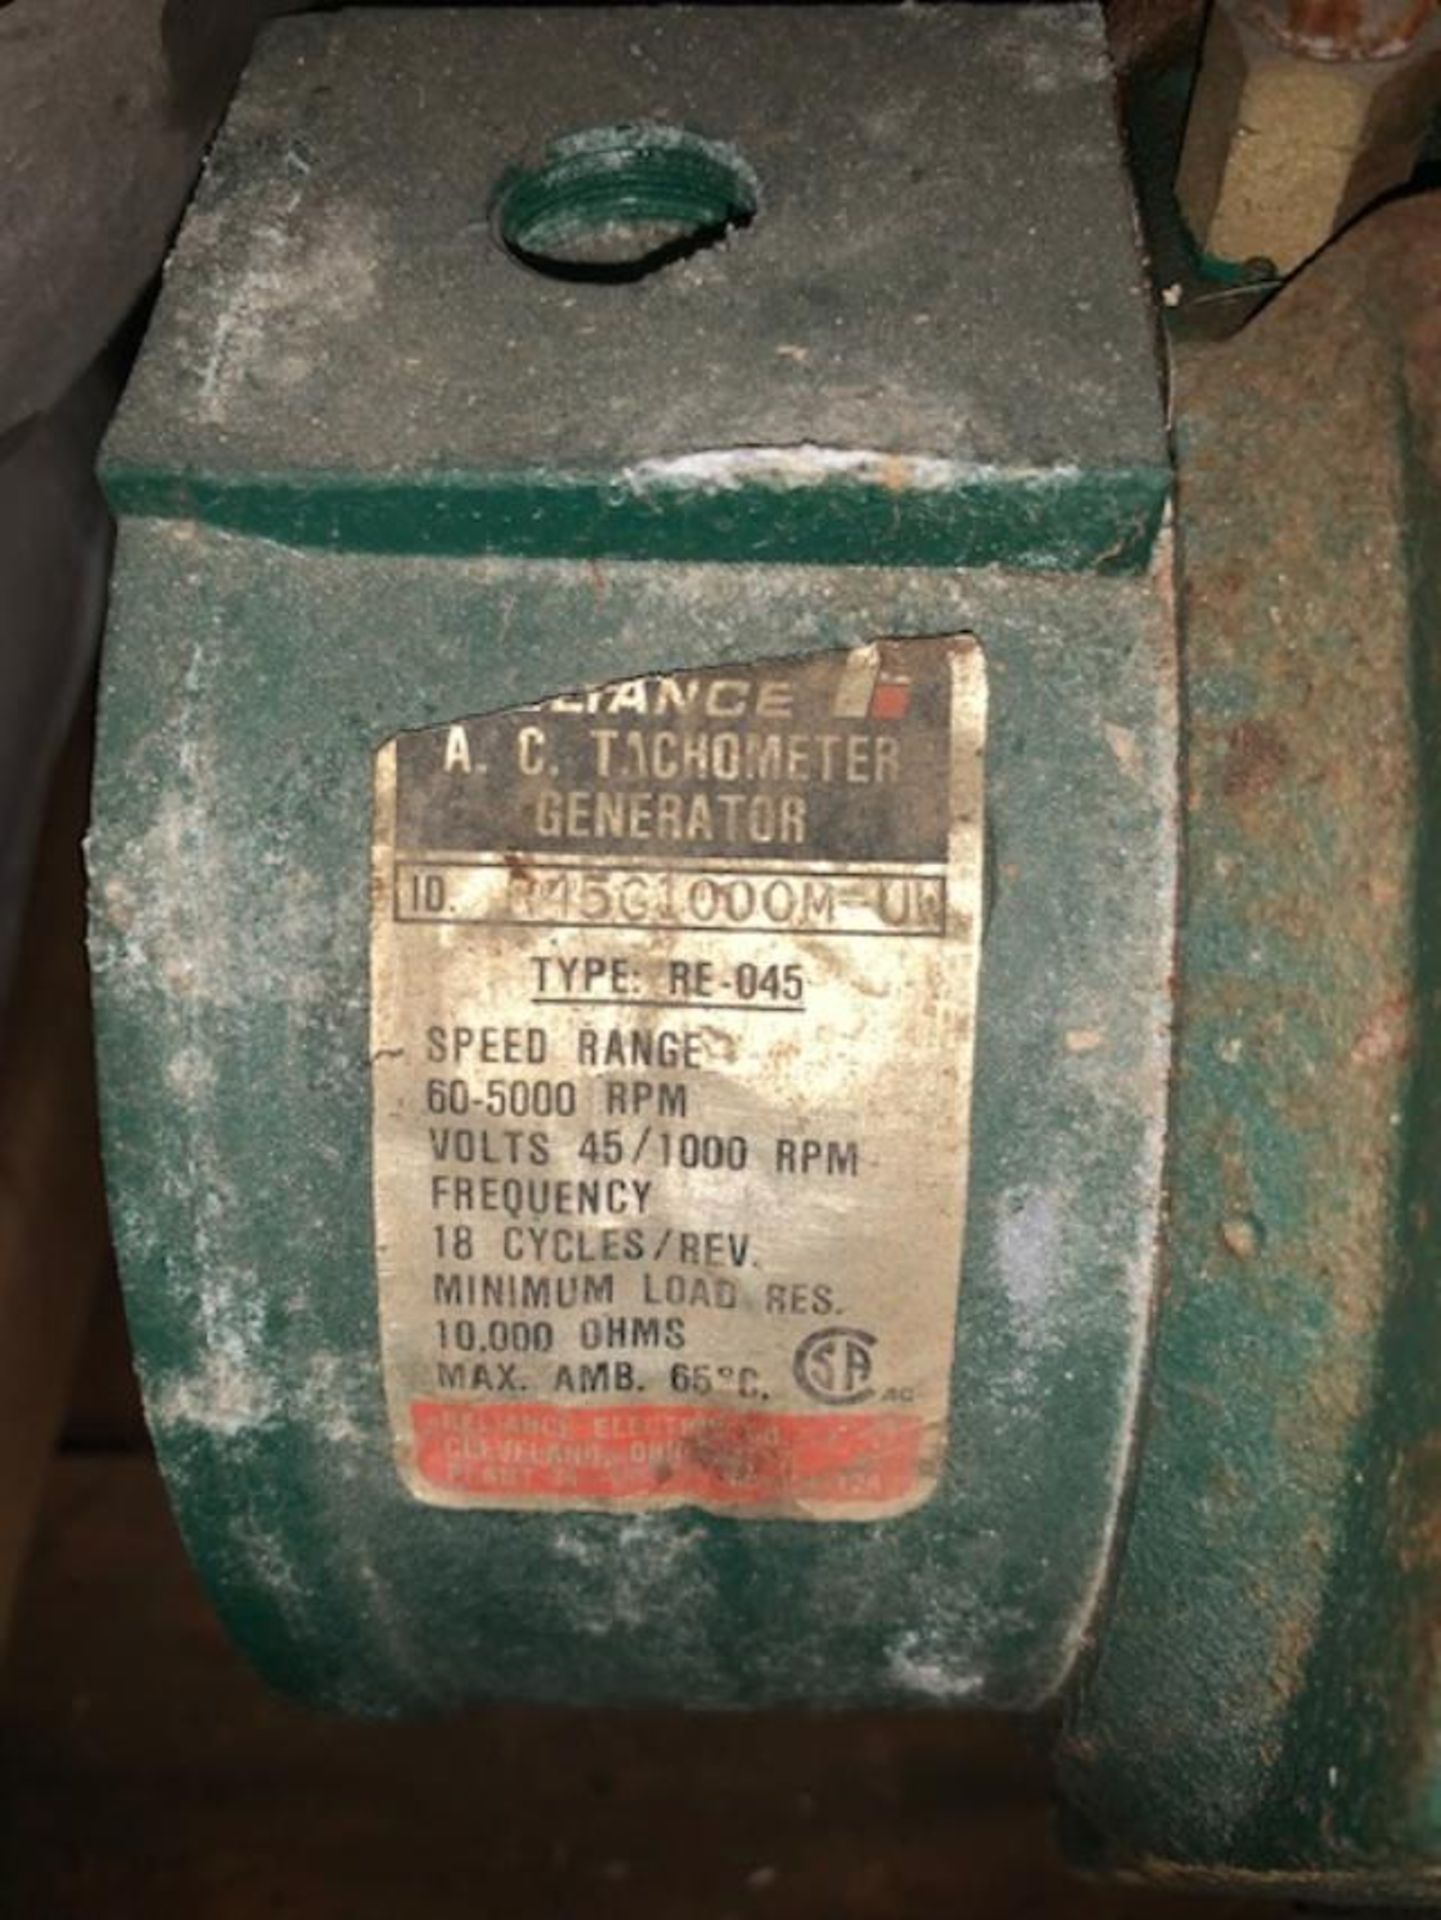 DC MOTOR WITH BLOWER, 10 HP RELIANCE, 1750-2800 RPM, 240 VOLT, RIGGING FEE $25.00 - Image 3 of 3